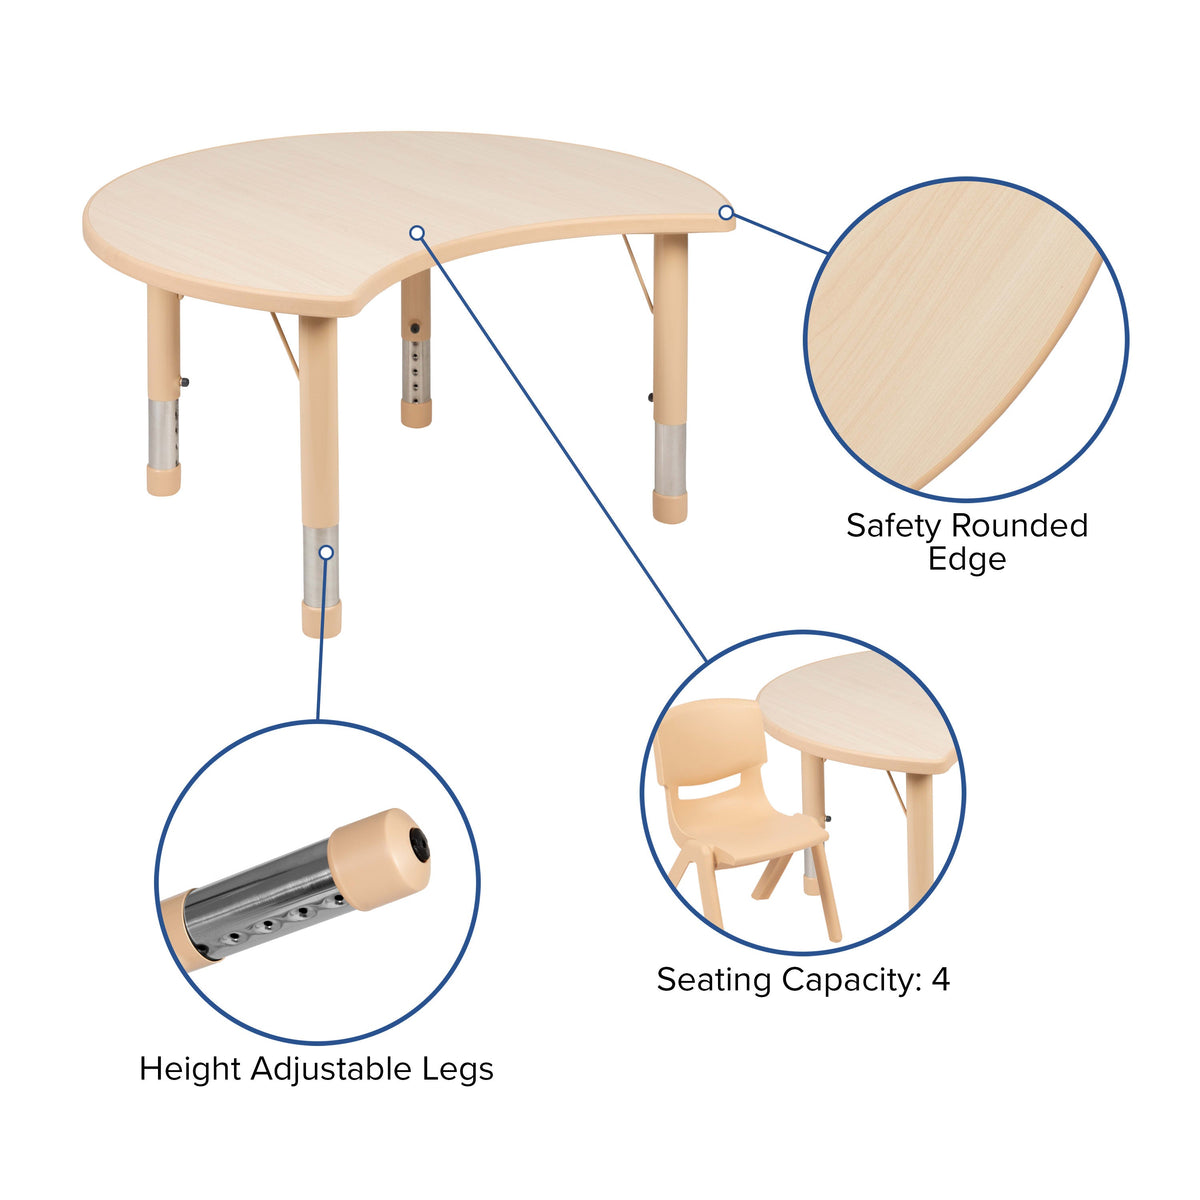 25.125inchW x 35.5inchL Crescent Natural Plastic Adjustable Activity Table-Seats 4